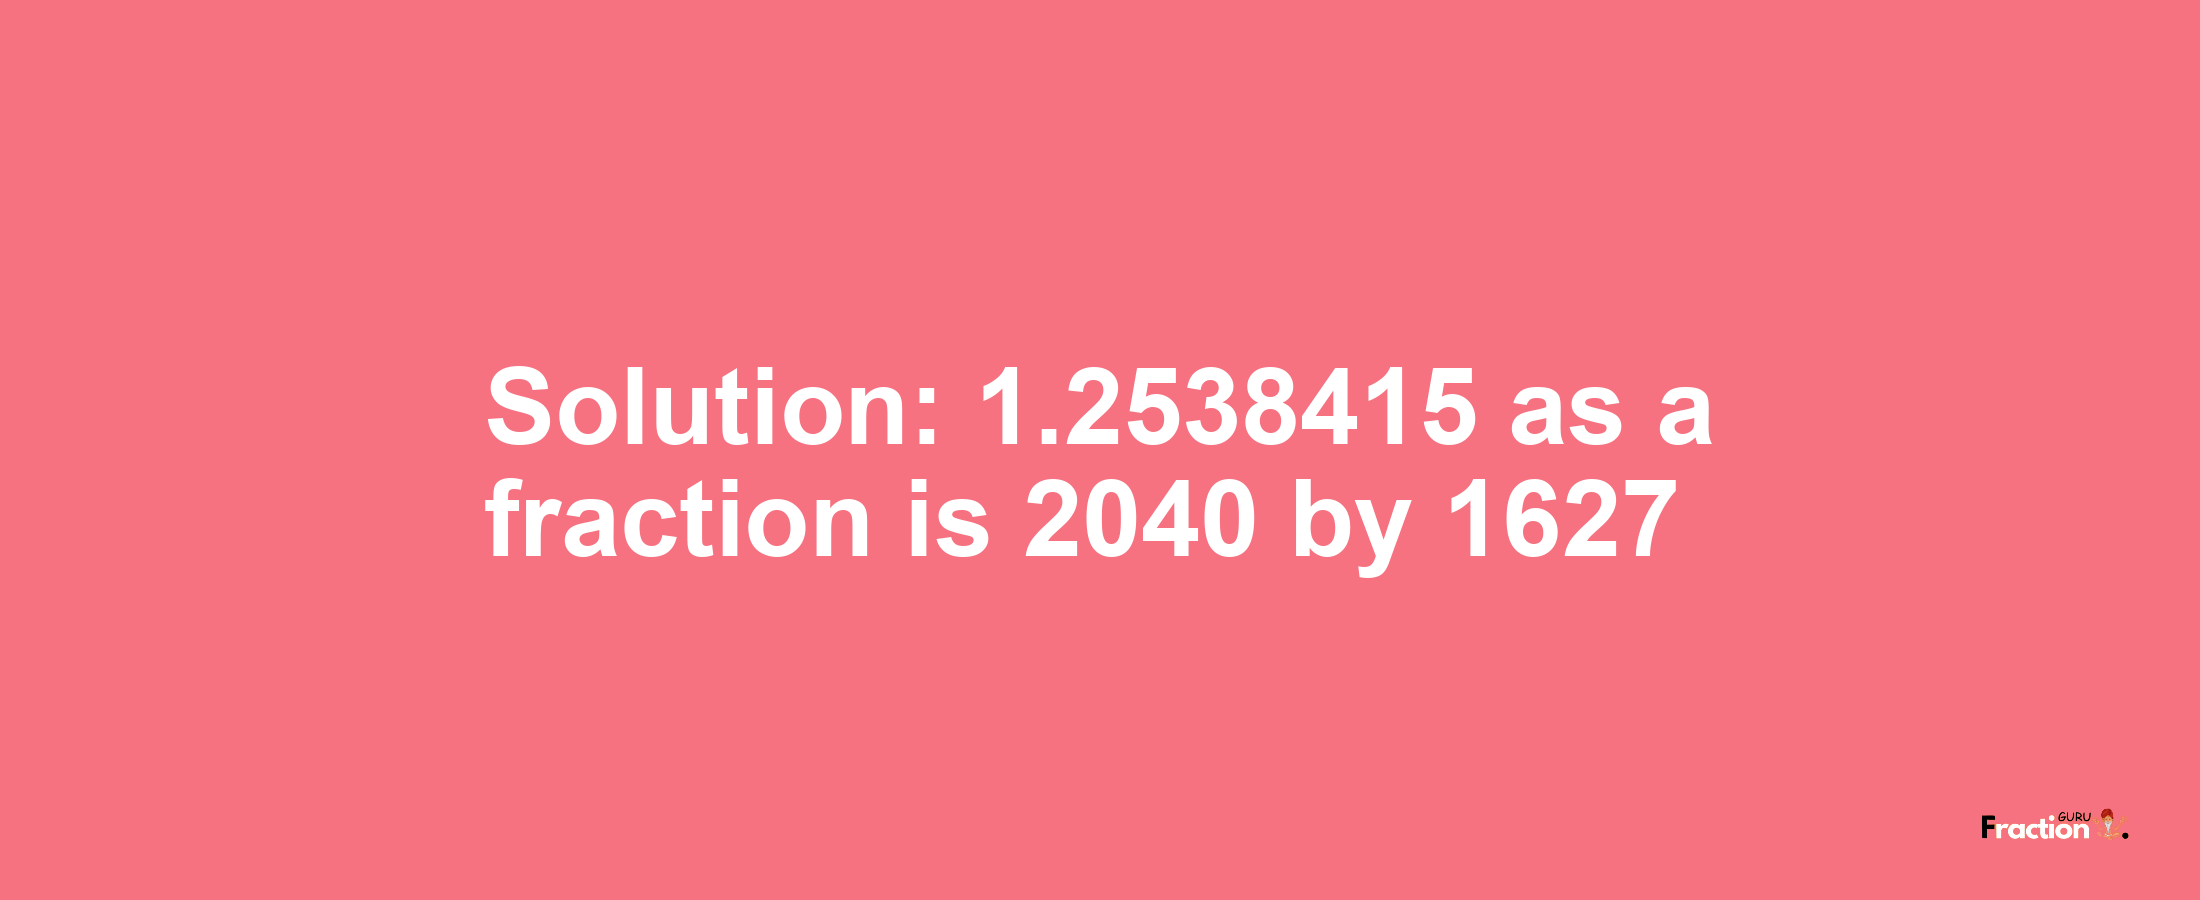 Solution:1.2538415 as a fraction is 2040/1627